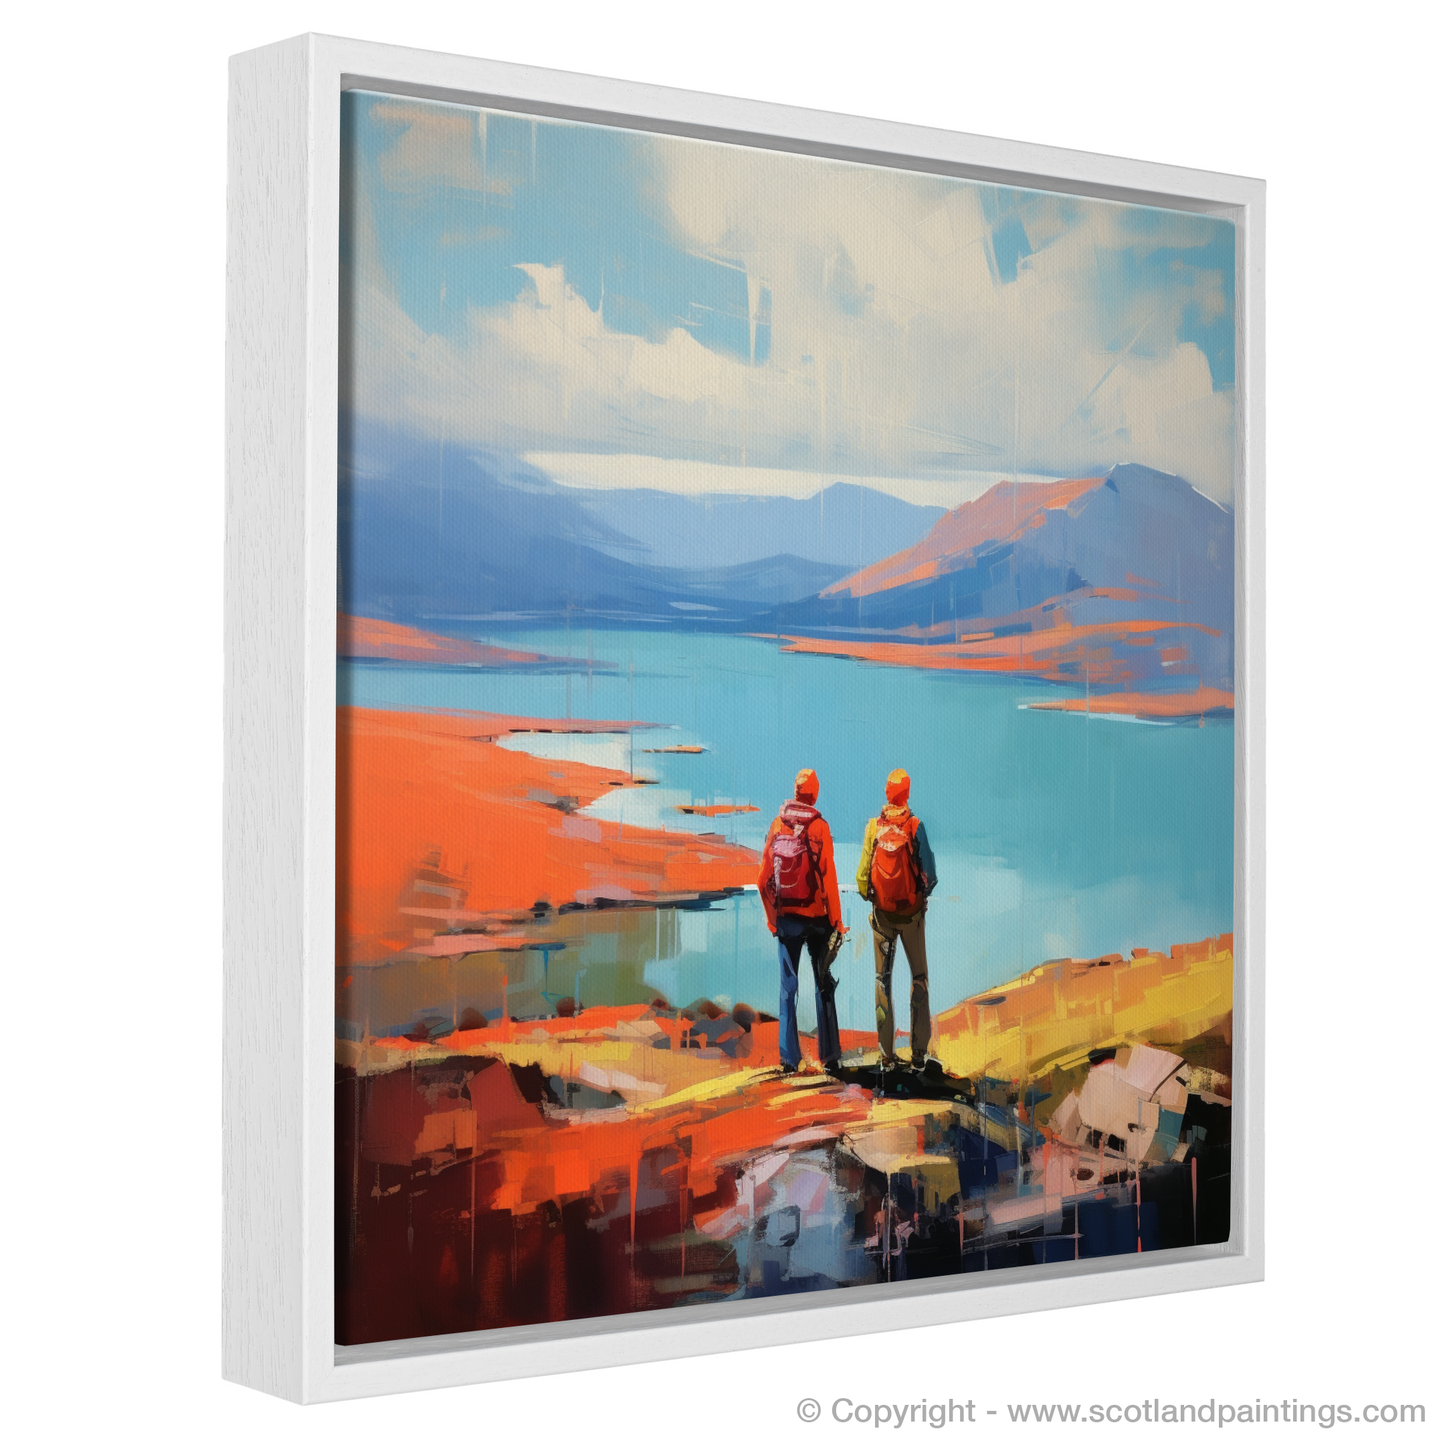 Painting and Art Print of Two hikers looking out on Loch Lomond entitled "Hikers' Repose at Loch Lomond".